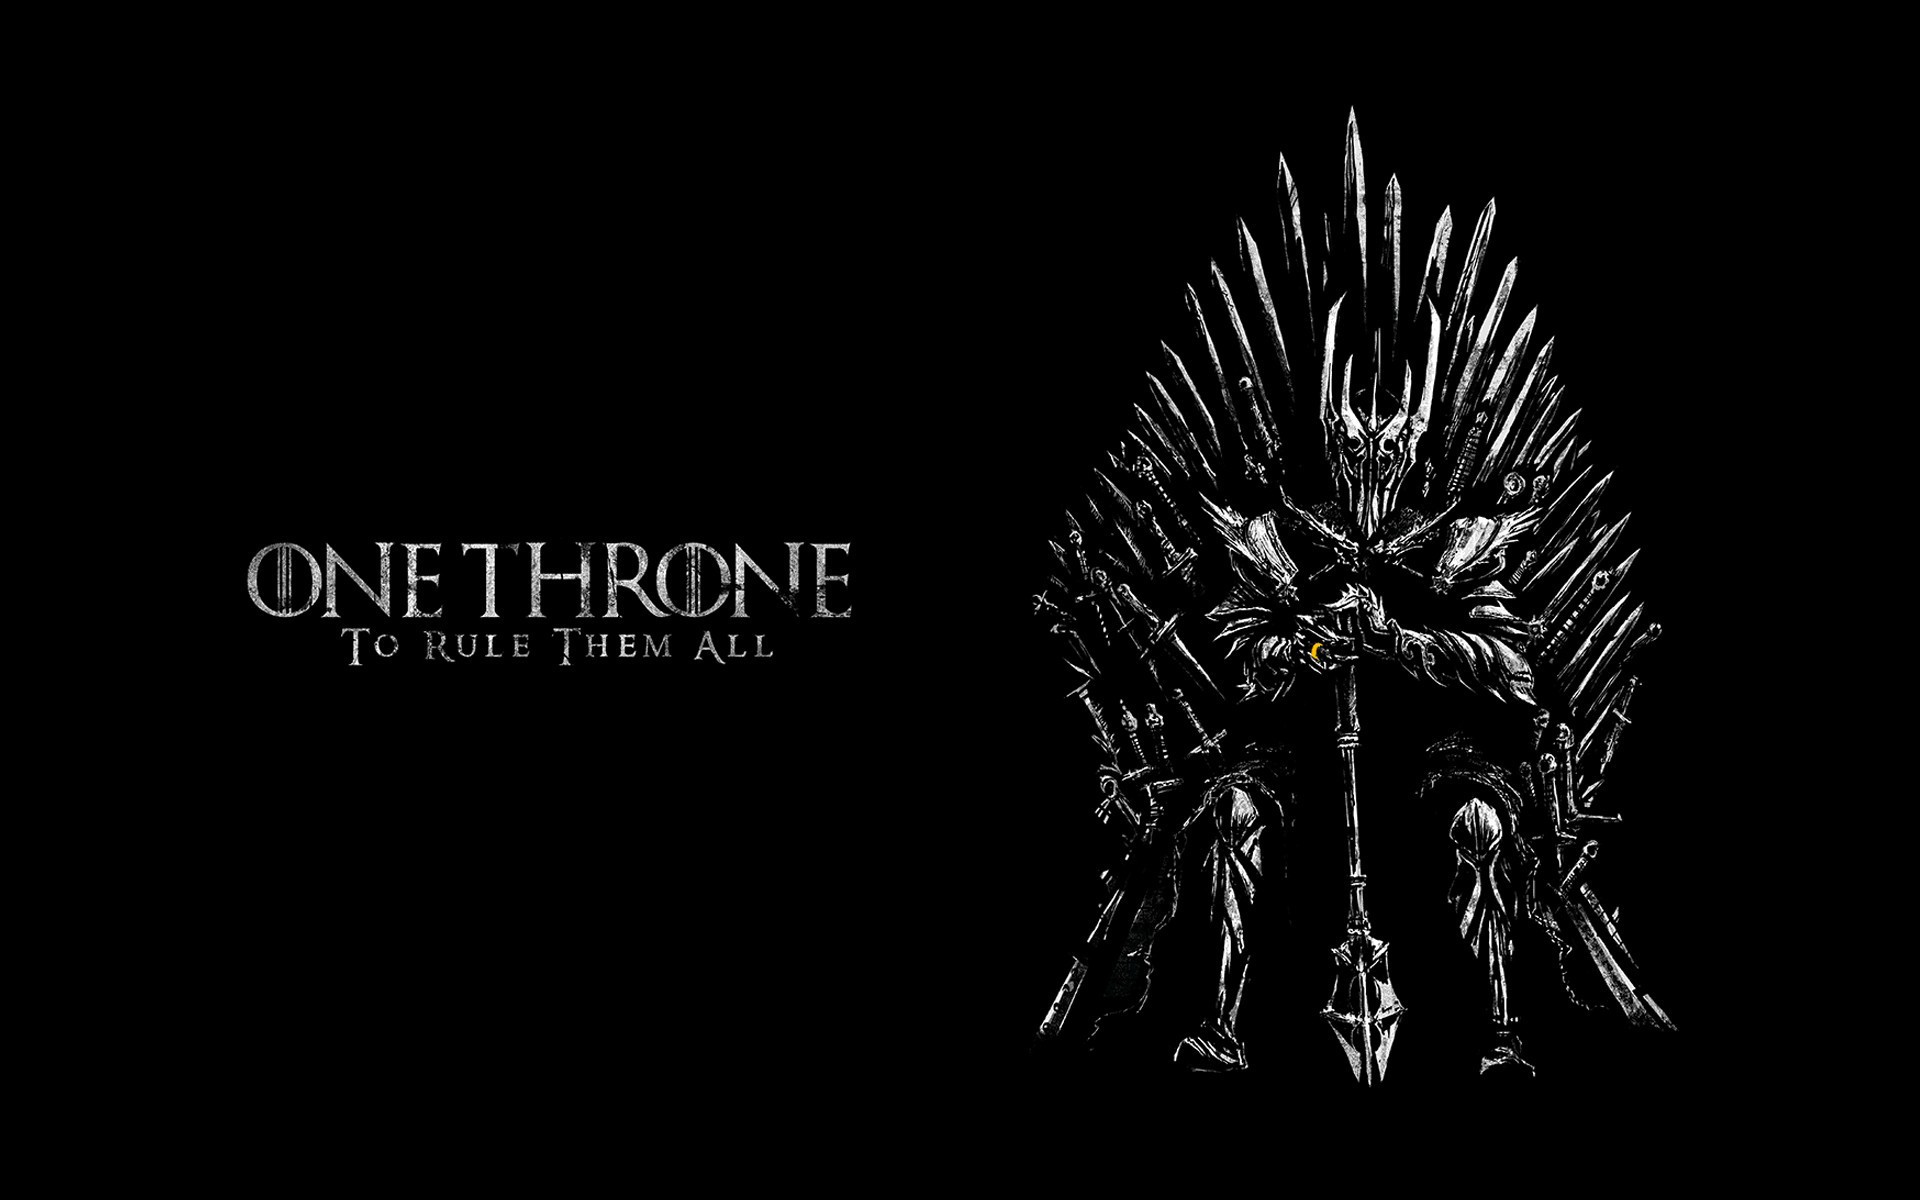 General 1920x1200 Game of Thrones The Lord of the Rings Sauron crossover movies TV series villains black background simple background text digital art